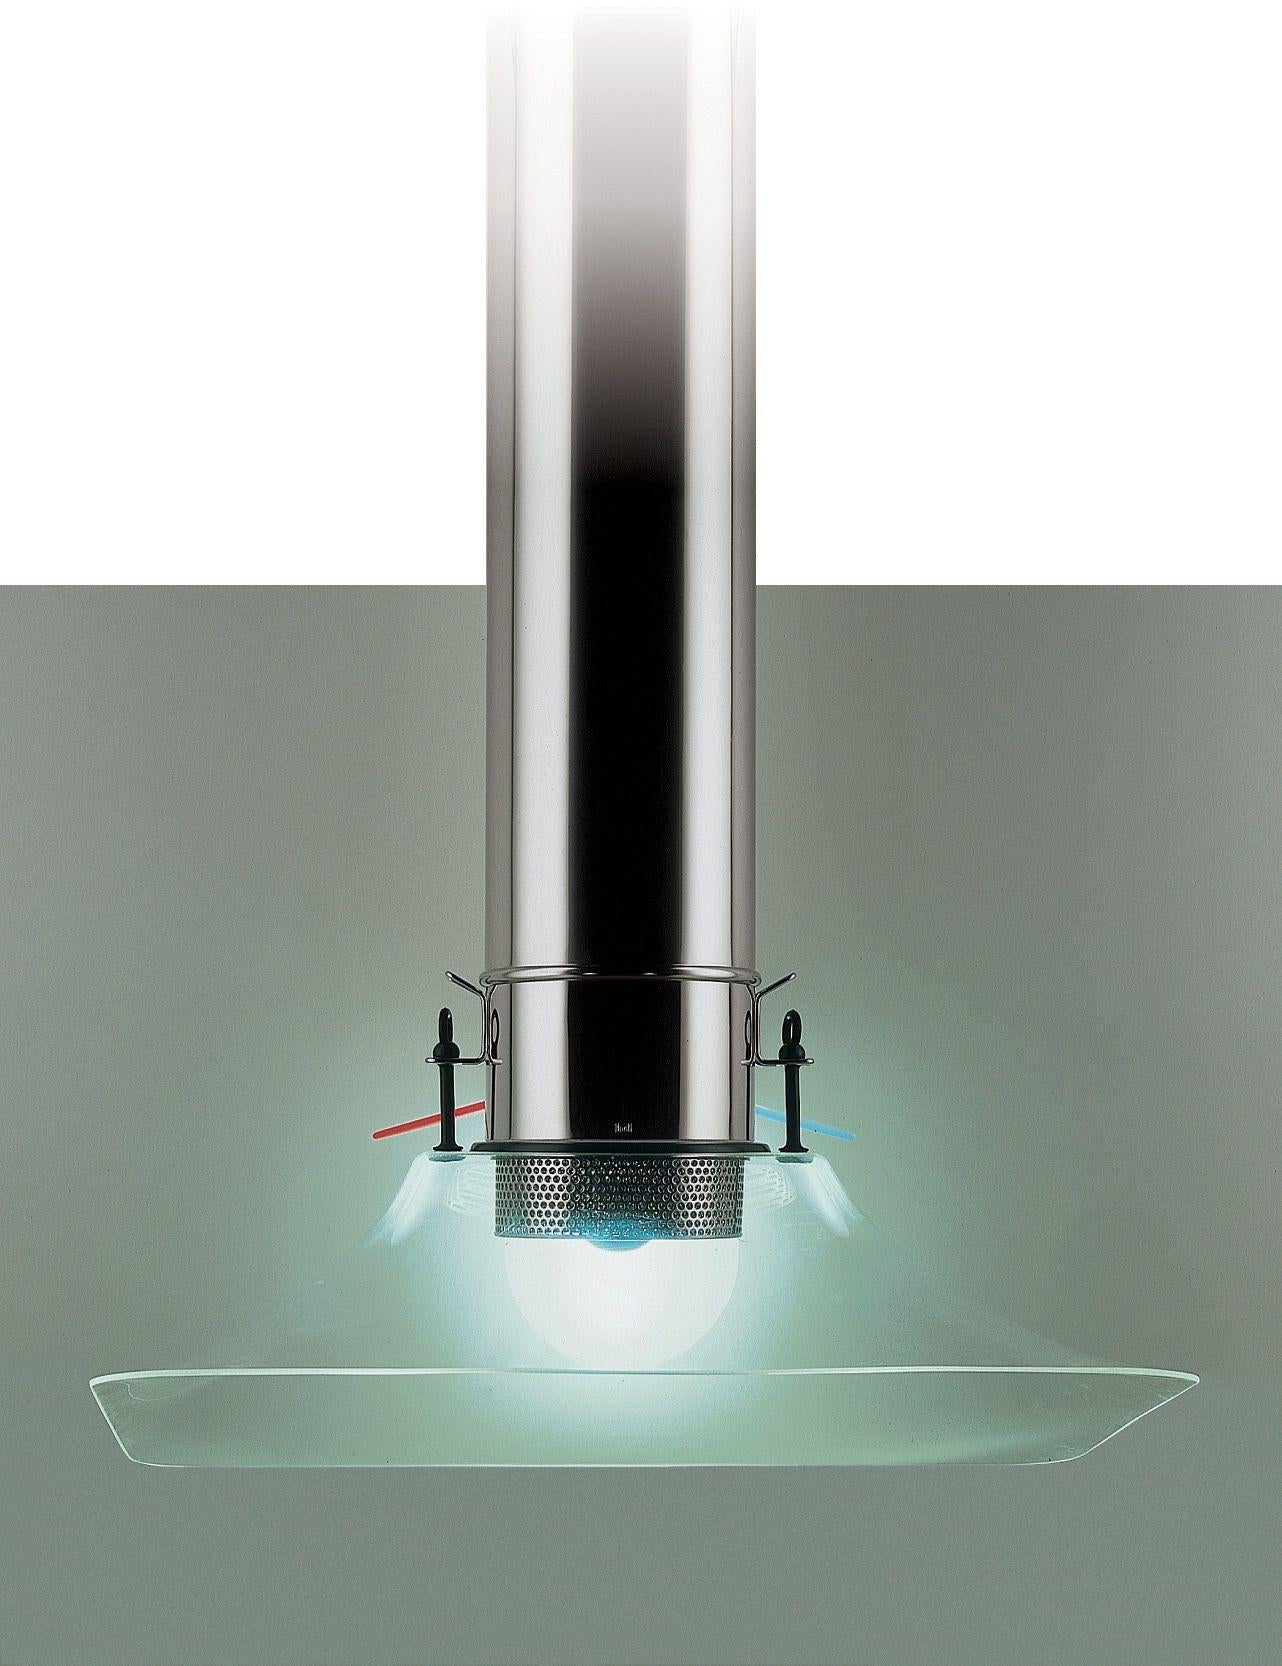 Diafana kitchen hood by Lluis Clotet & Oscar Tusquets 
Dimensions: D 50 x W 90 x H 60 cm 
Materials: Motor housing, exit pipes, elbows, reduces, and grease collector tray in polished stainless steel. Flexible pipes and filters in aluminum. Cast